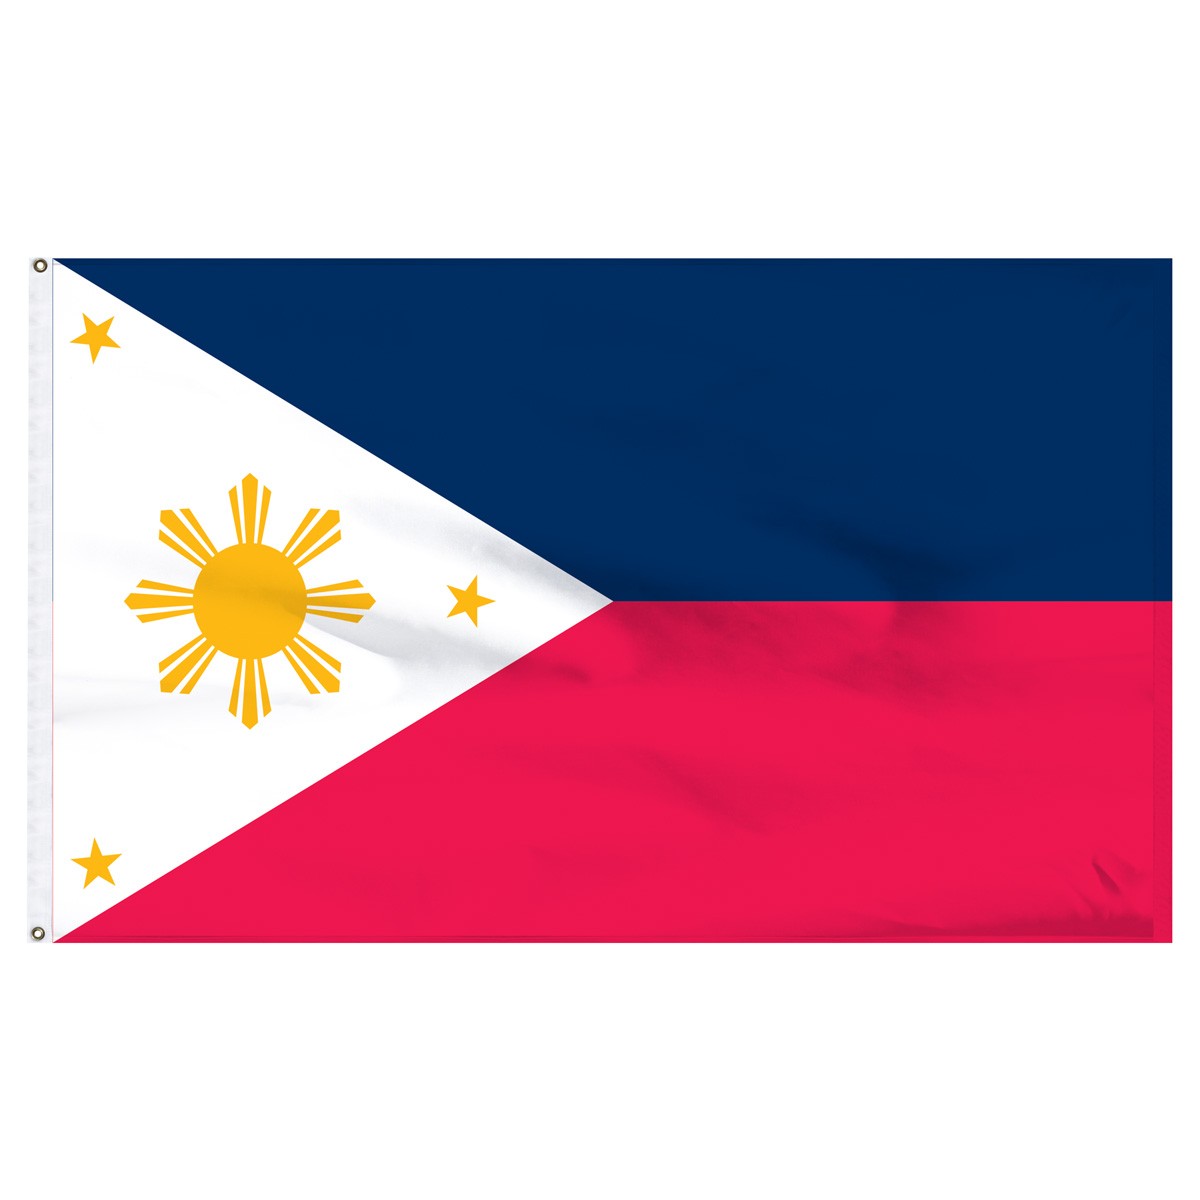 Philippines Building Pennants and Flags